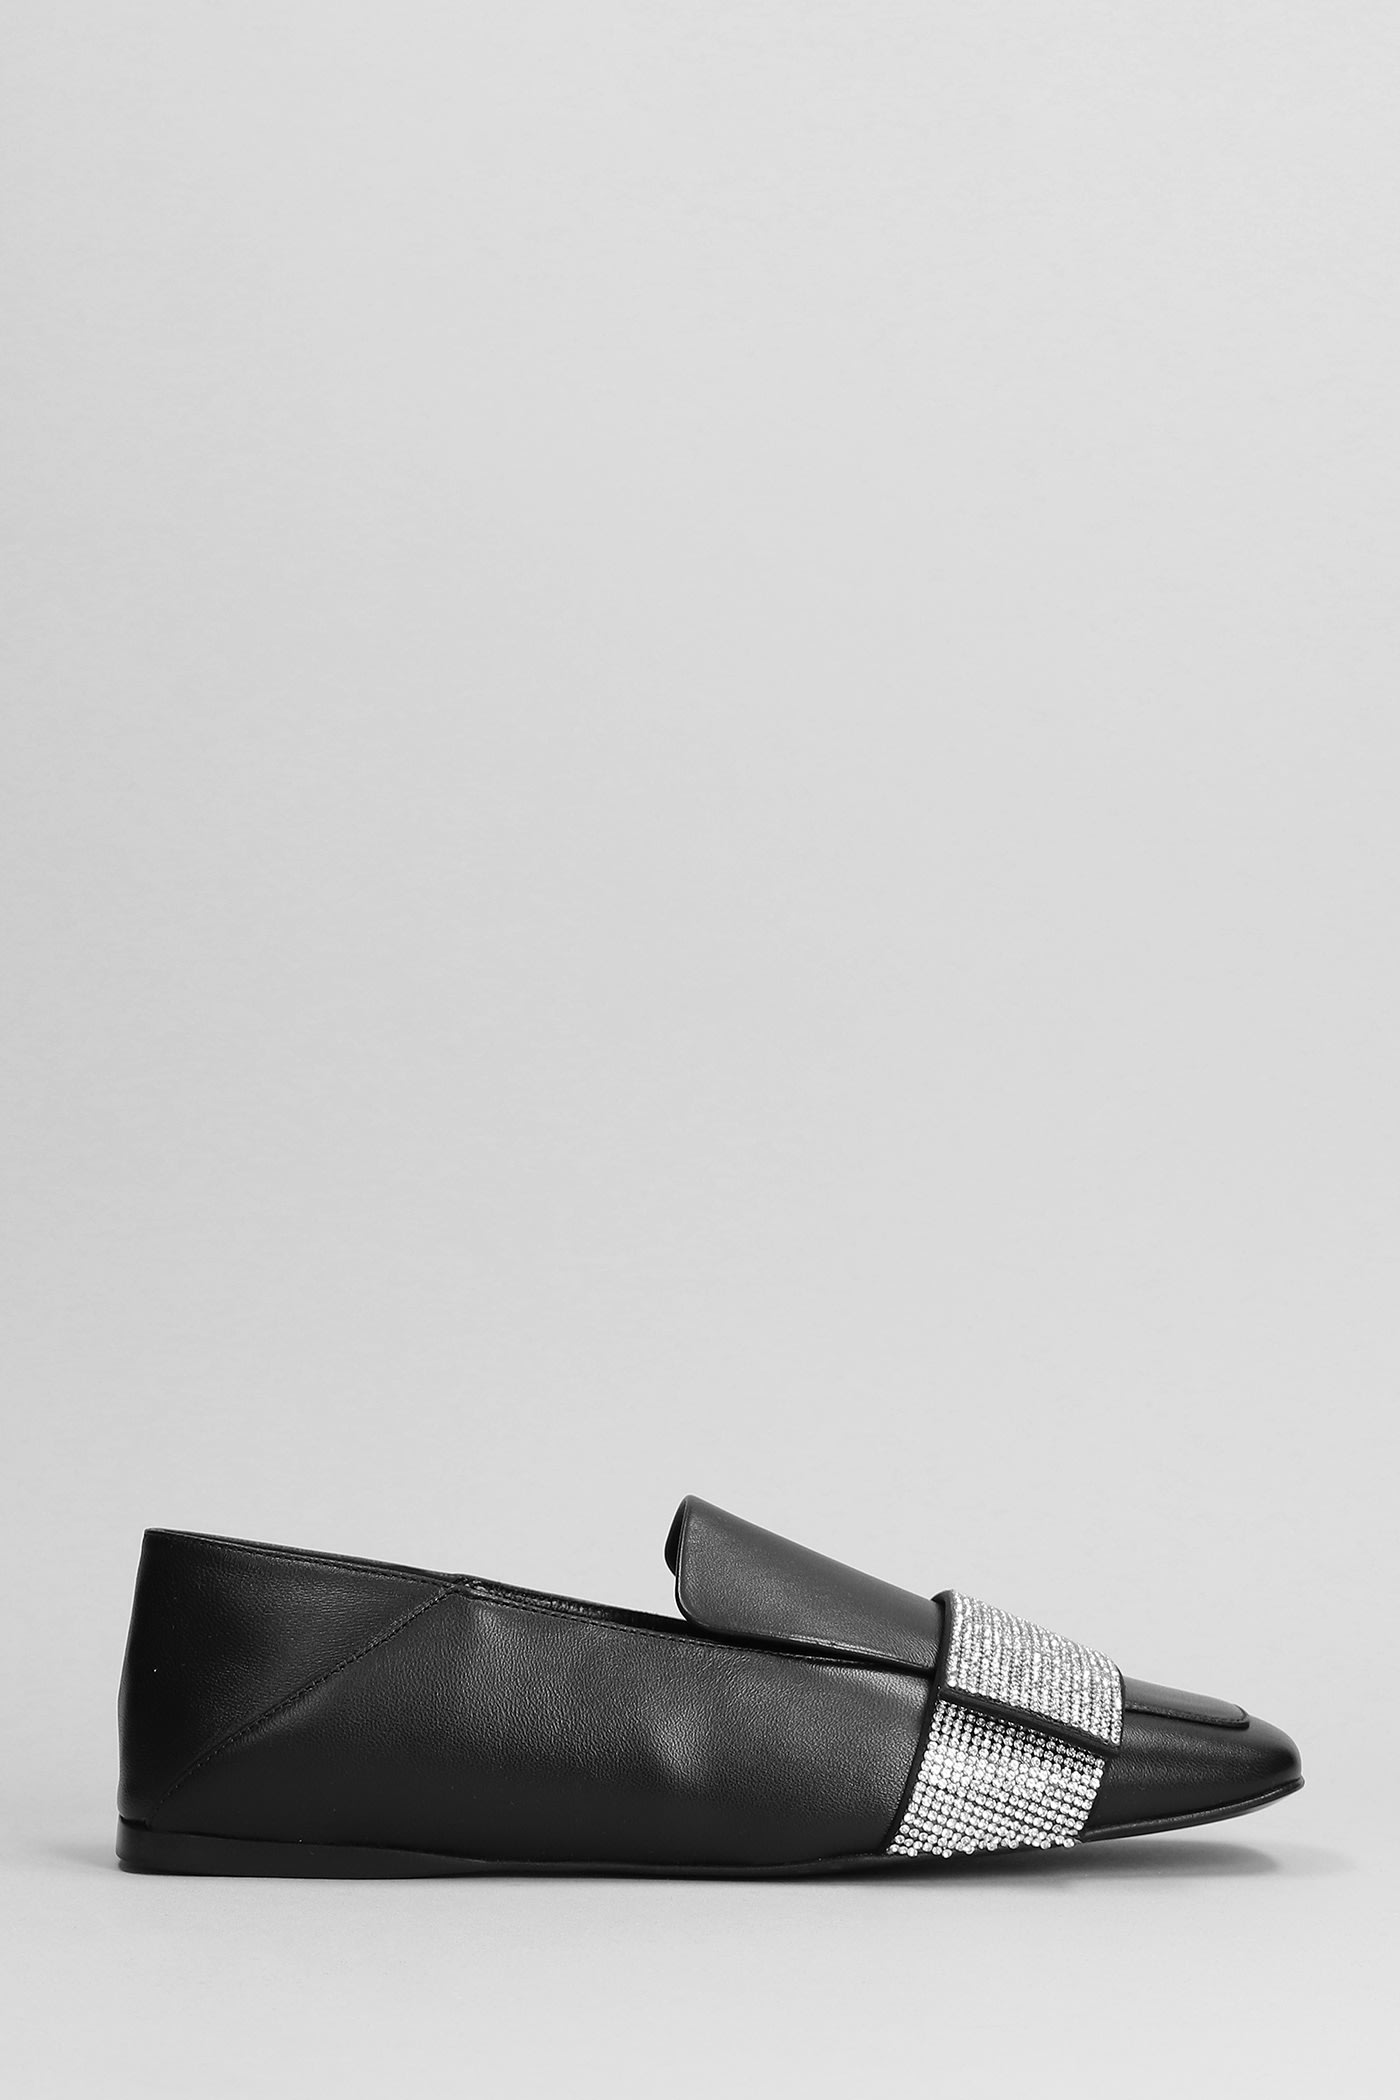 Sergio Rossi Loafers In Black Leather